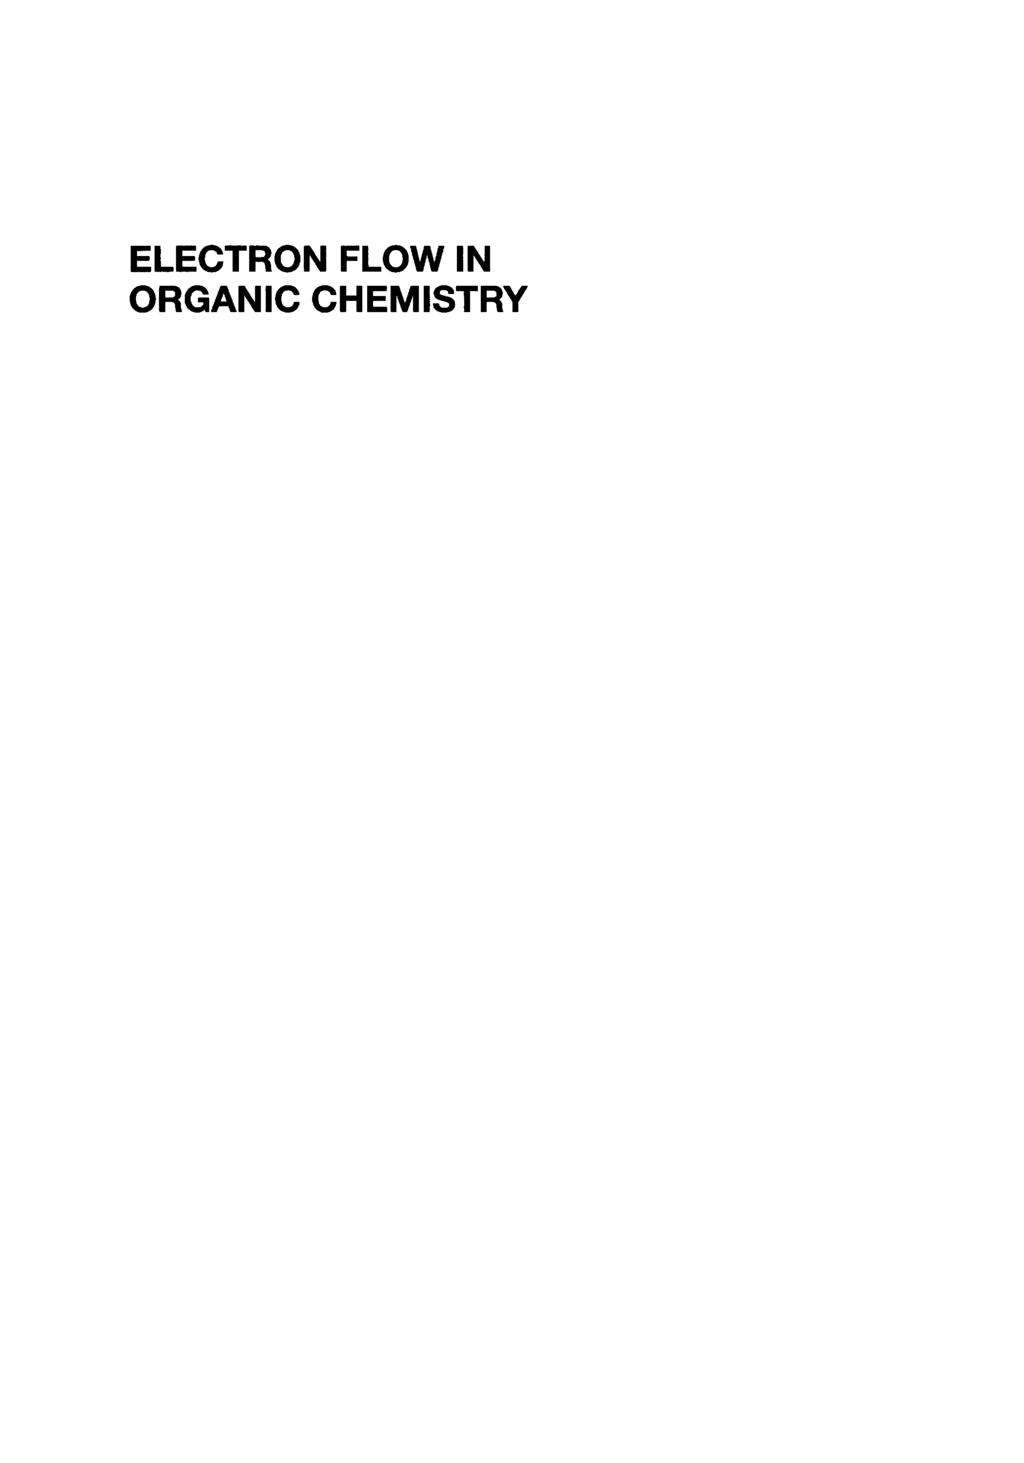 ELECTRON FLOW IN